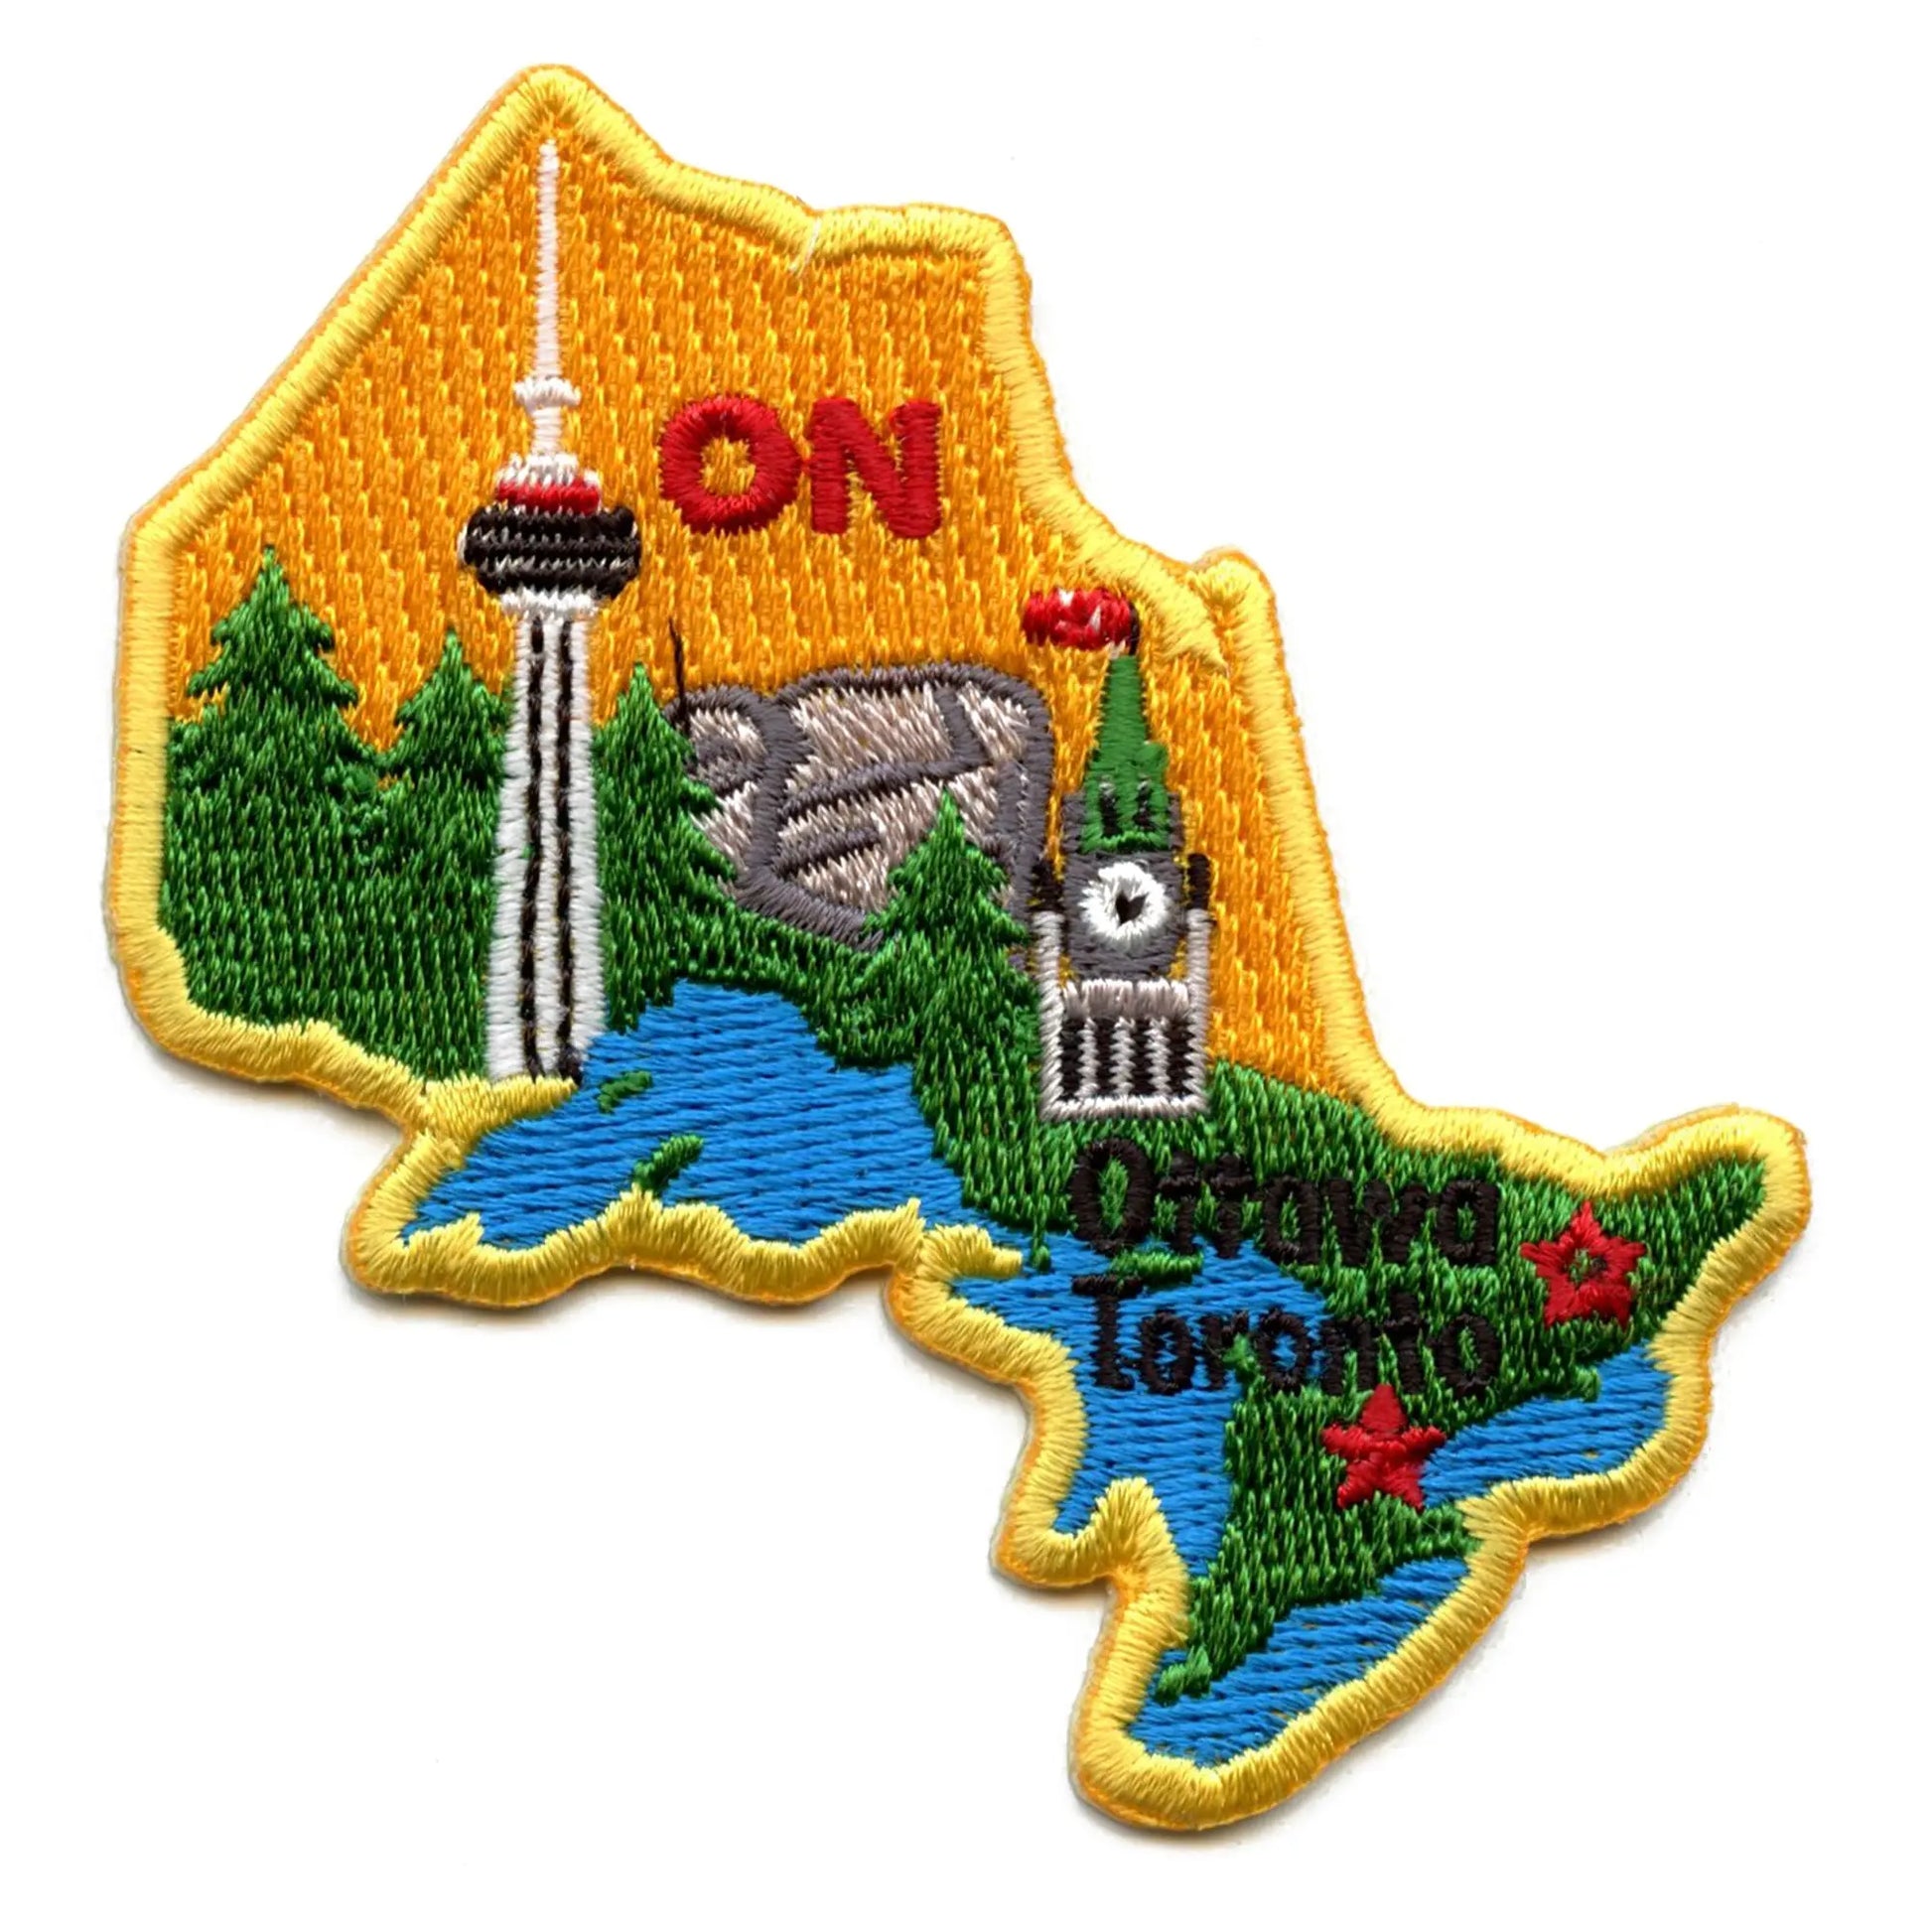 Canada Patches: Embroidered, Iron-on or Any Custom Patches